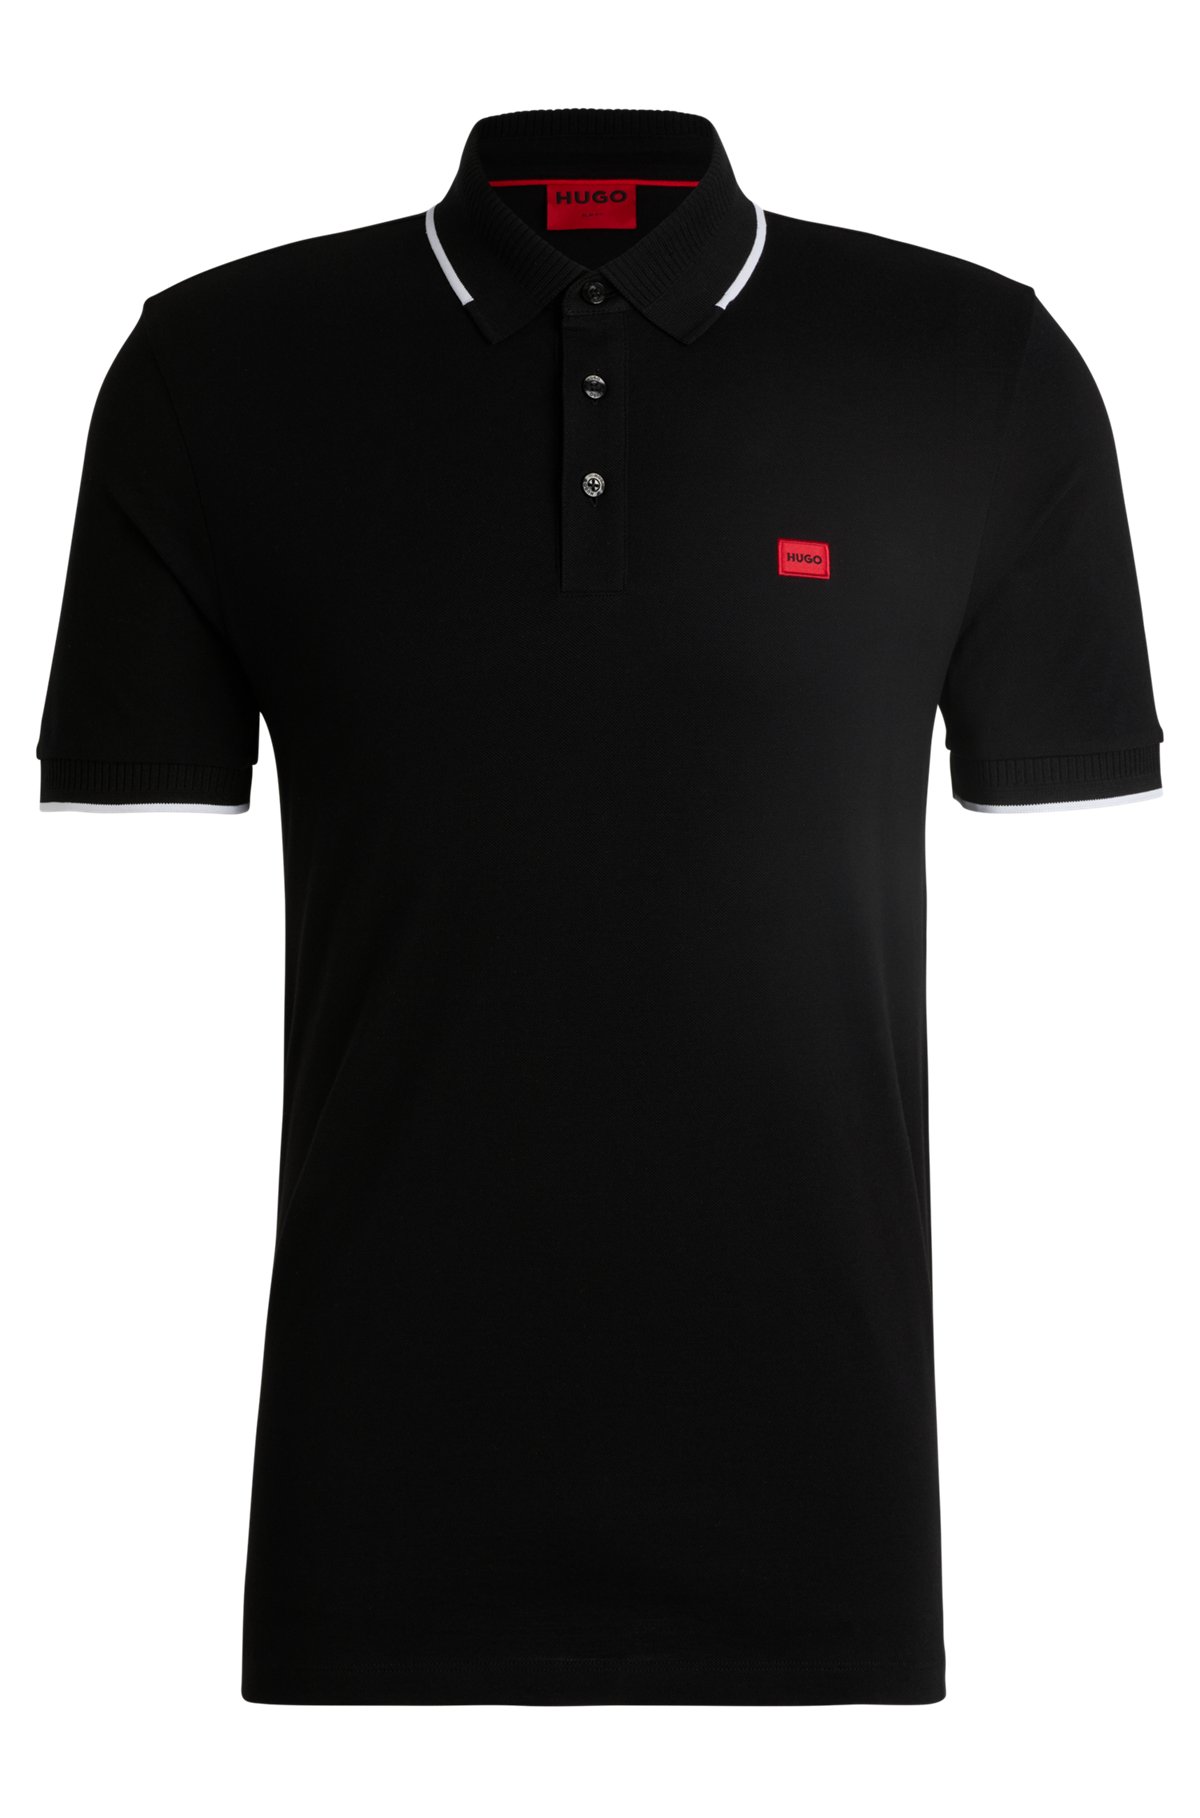 HUGO - Cotton-piqué slim-fit polo shirt with red logo label